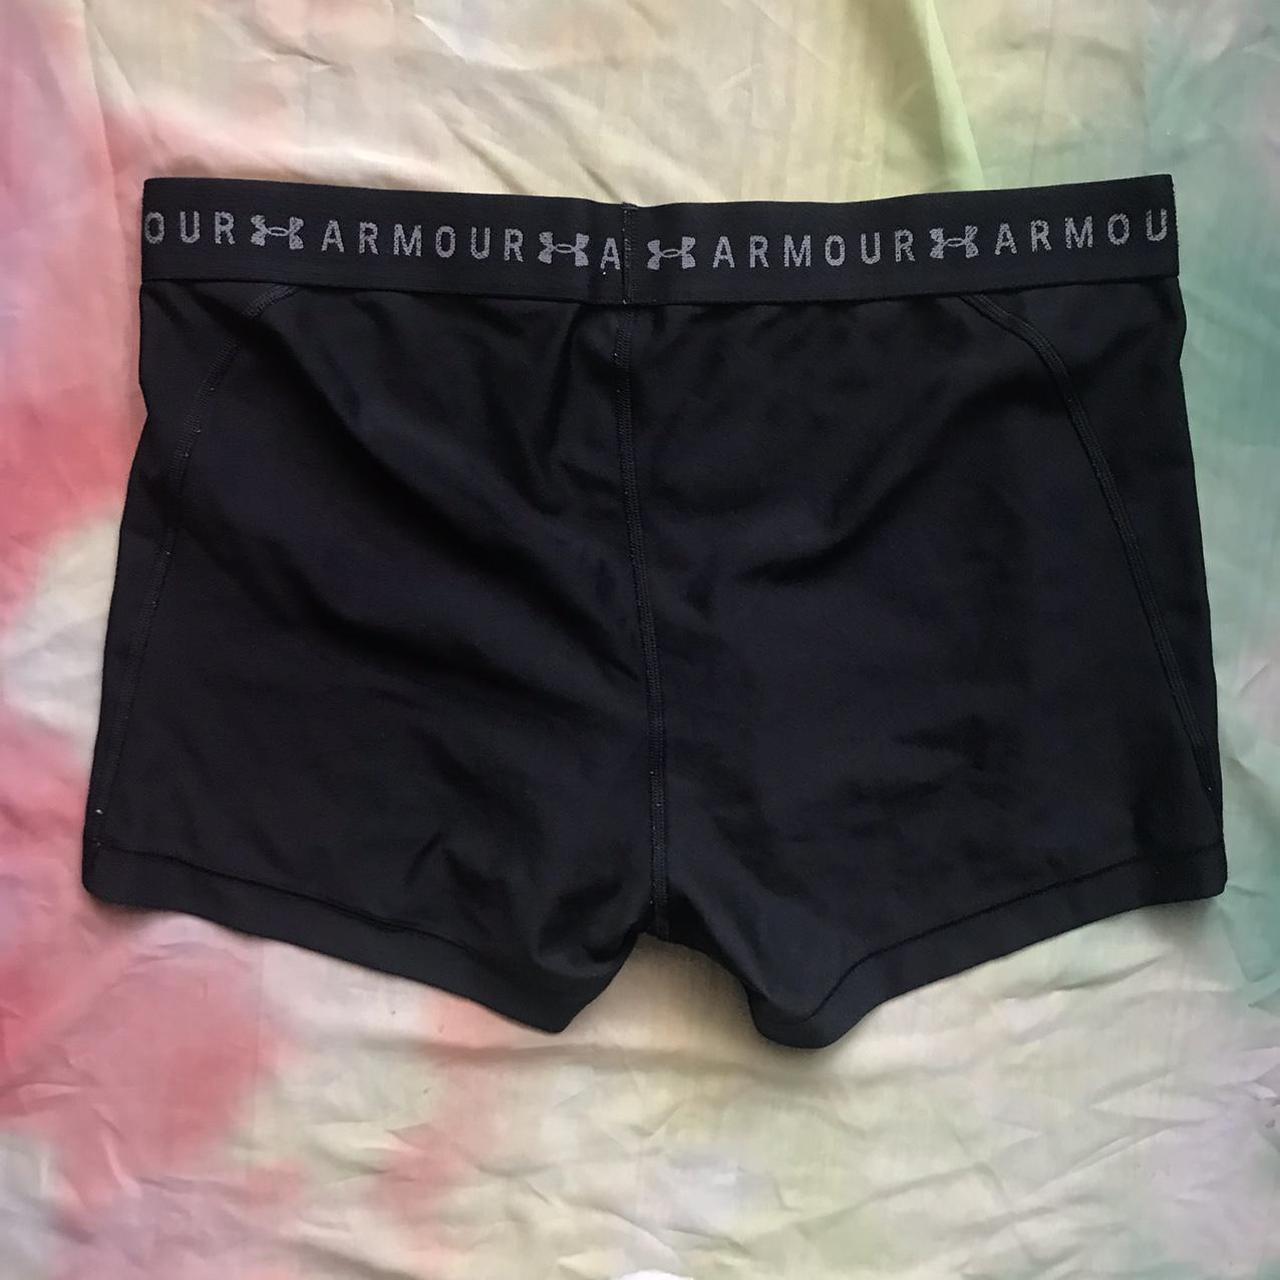 Product Image 4 - Under Armour Black Shorts 🖤

No